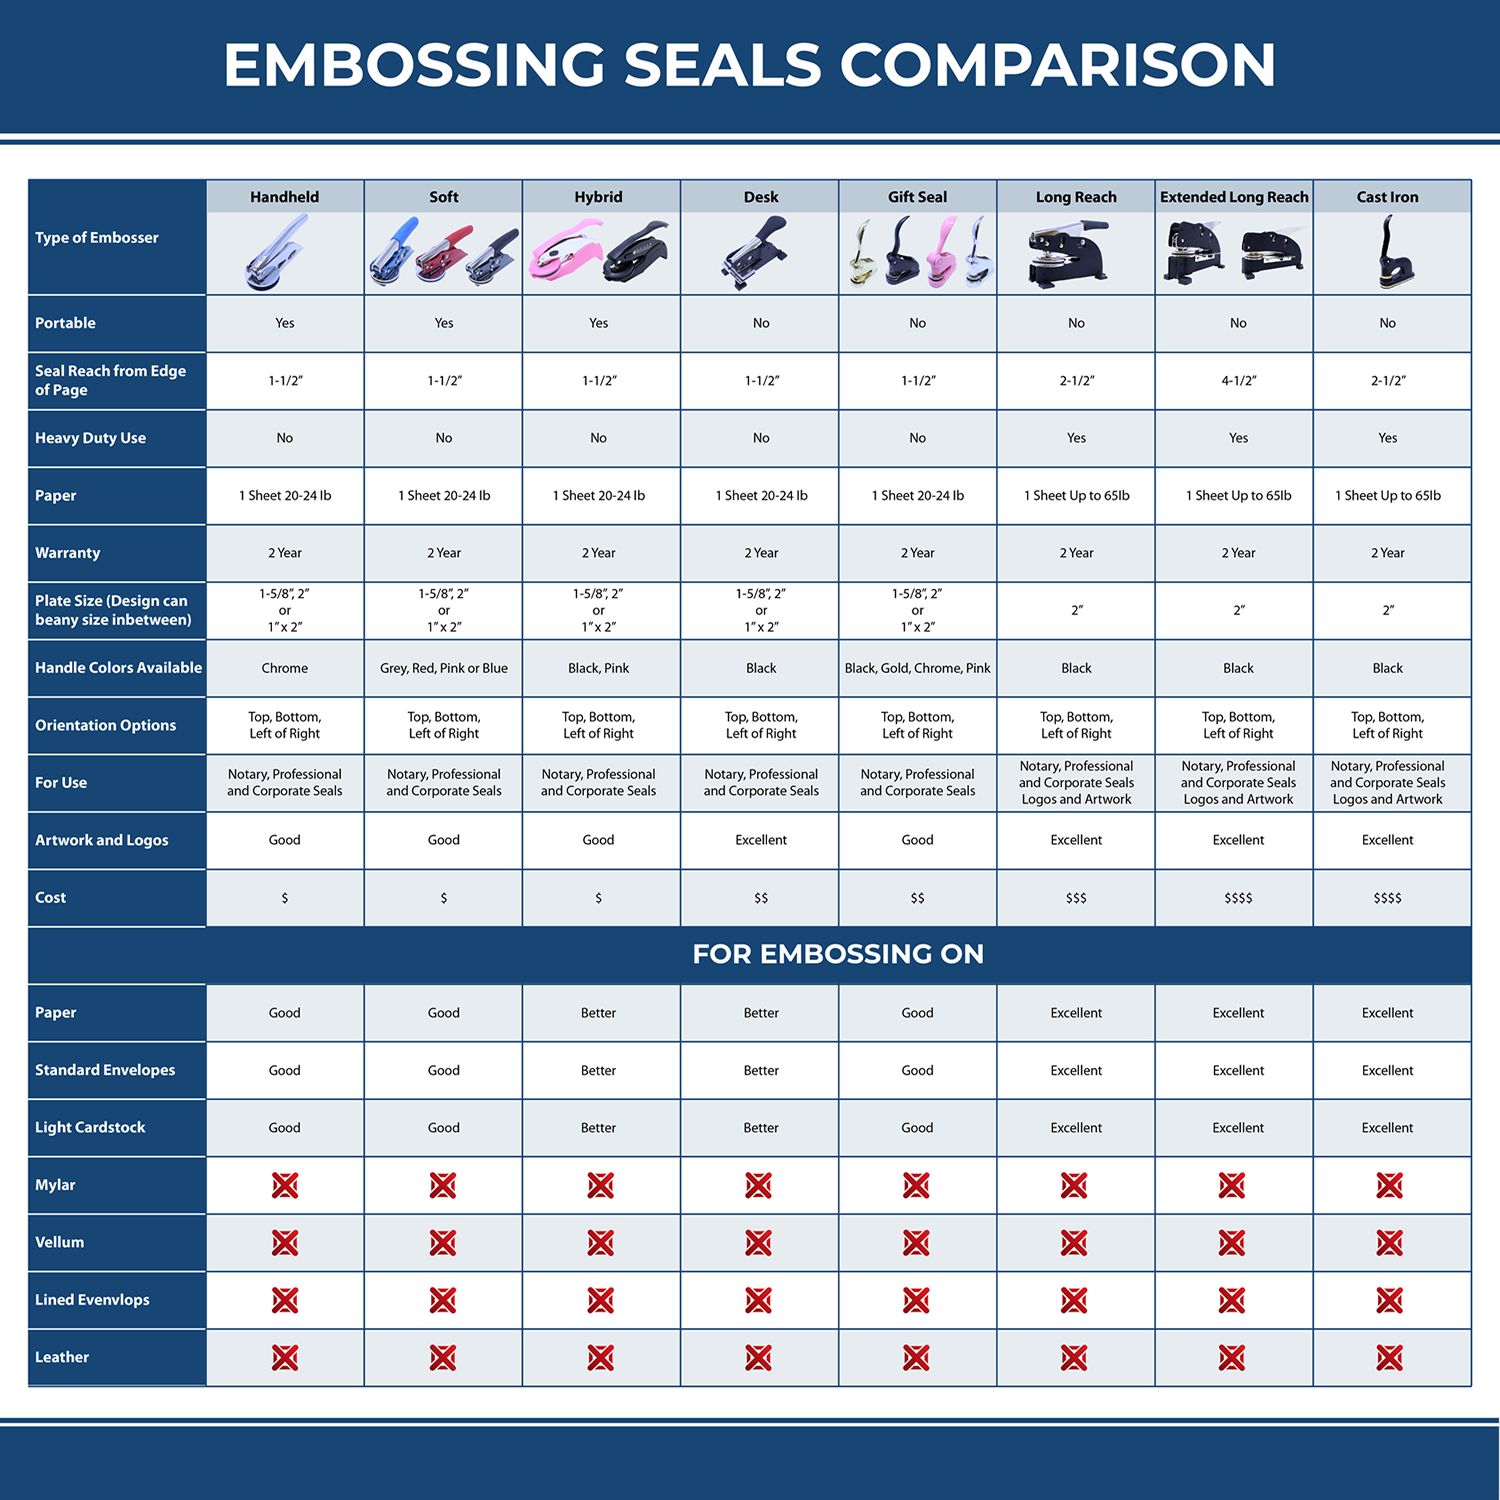 A comparison chart for the different types of mount models available for the State of Arkansas Long Reach Architectural Embossing Seal.